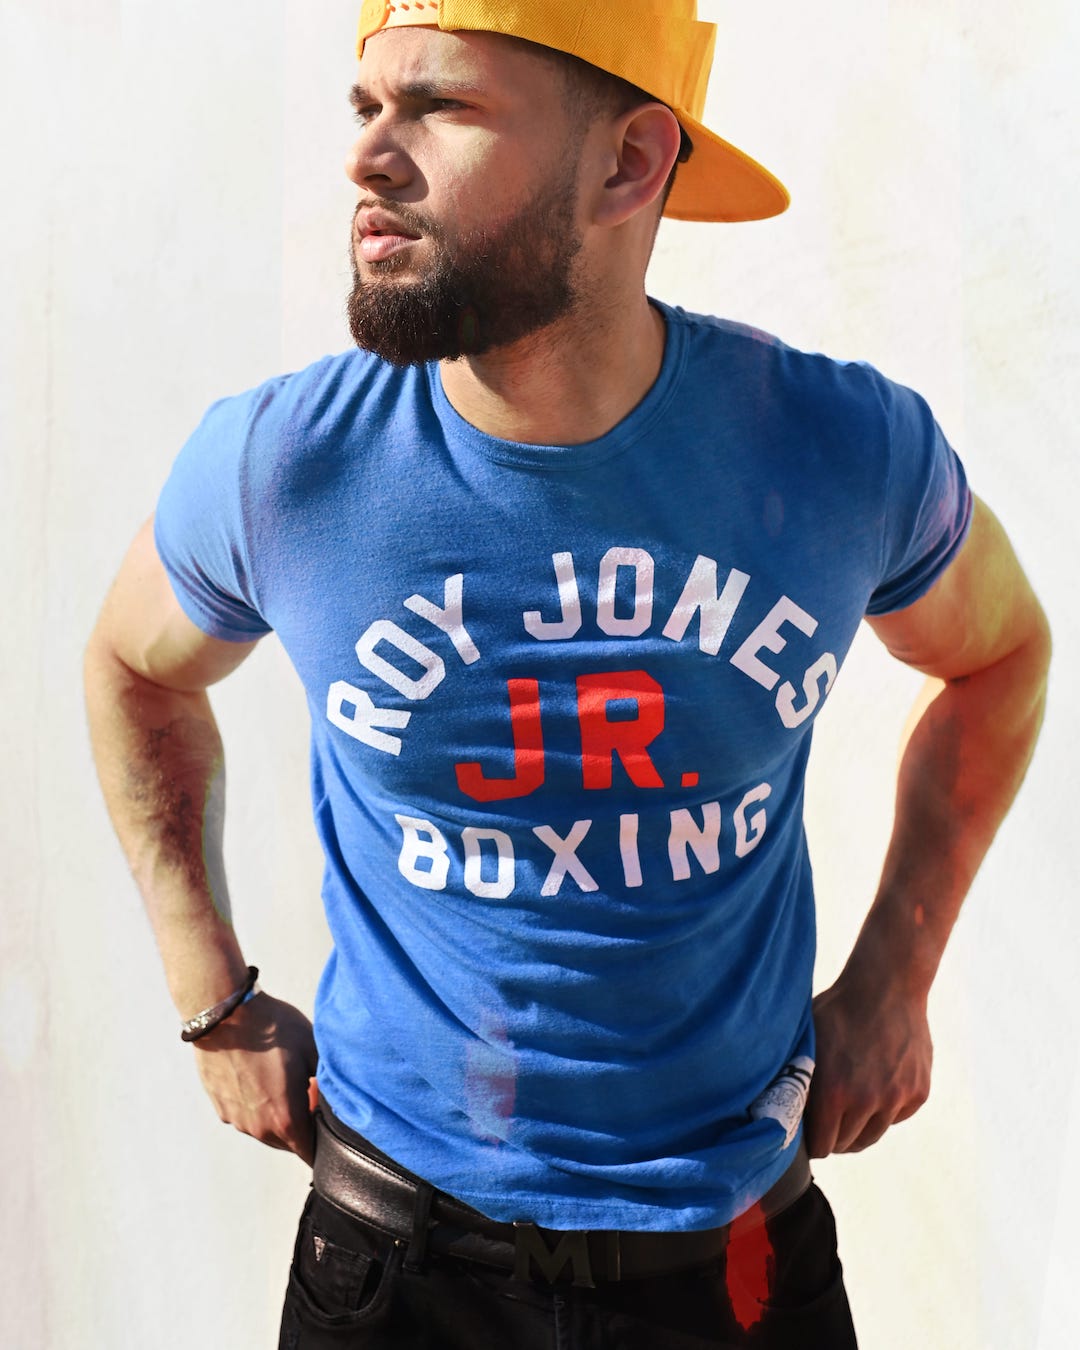 Roy Jones Jr. USA Boxing Blue Tee - Roots of Fight